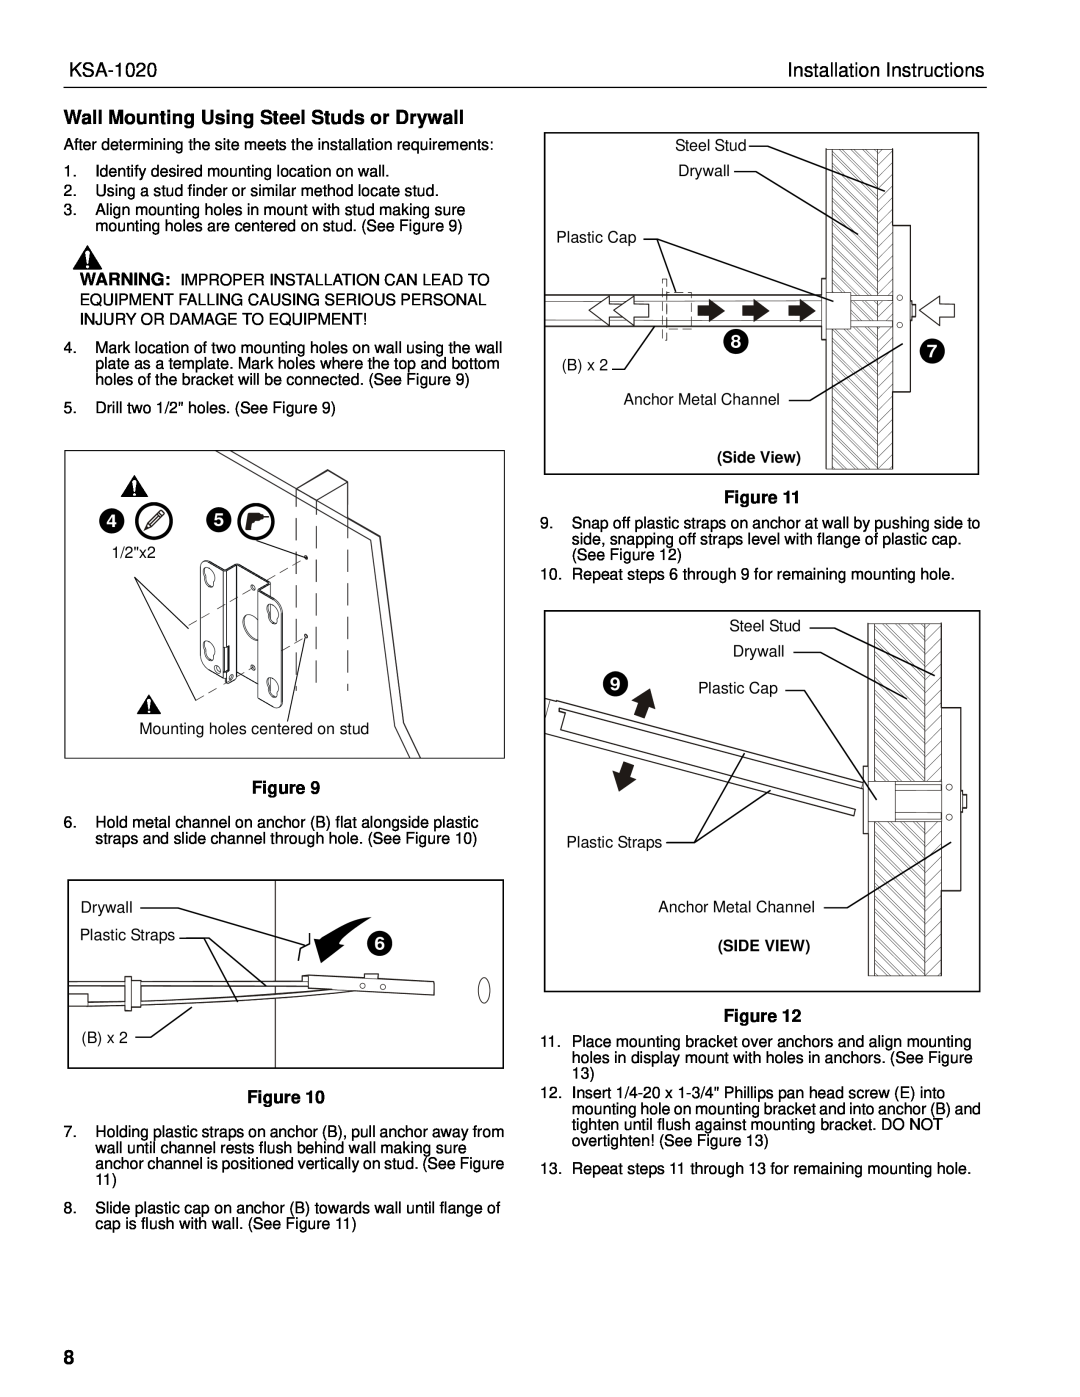 Chief Manufacturing KSA-1020 Installation Instructions, Wall Mounting Using Steel Studs or Drywall 